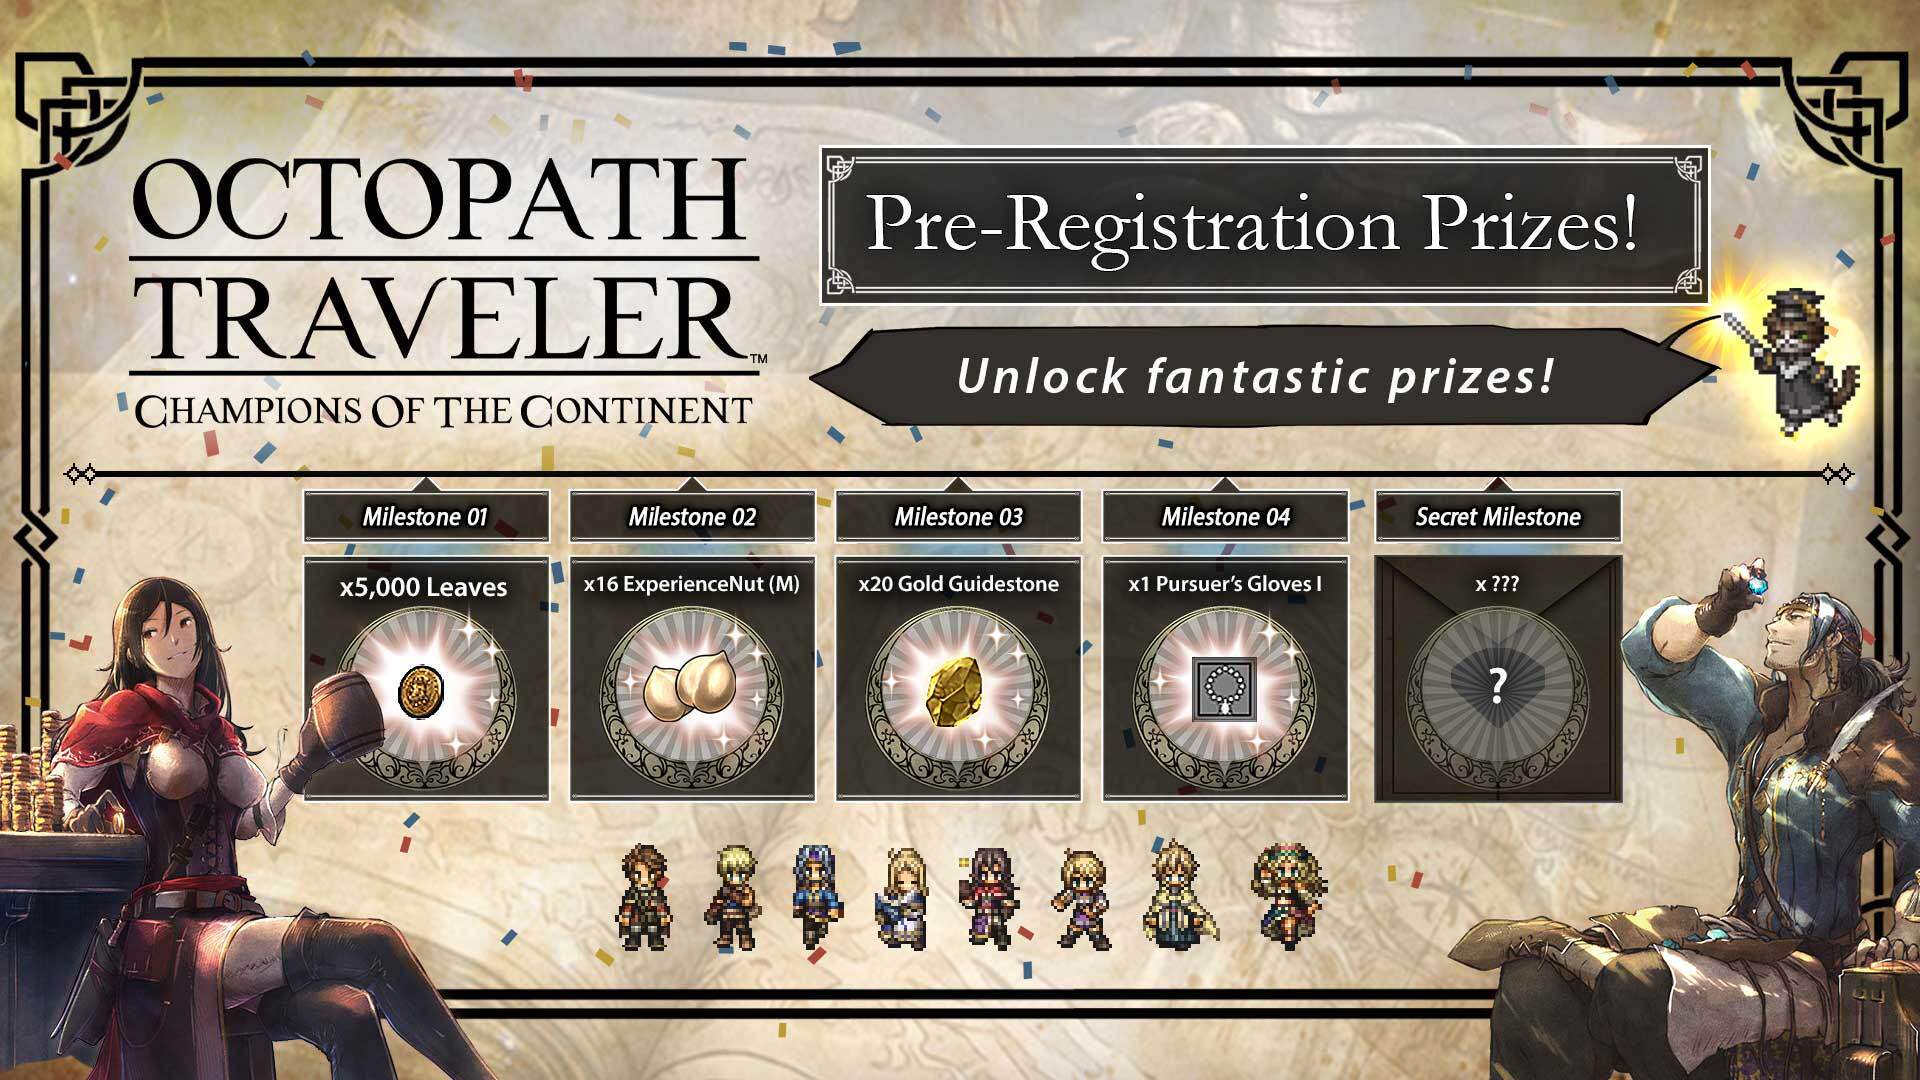 SQUARE ENIX  The Official SQUARE ENIX Website - Pre-register now for  _OCTOPATH TRAVELER: Champions of the Continent_!